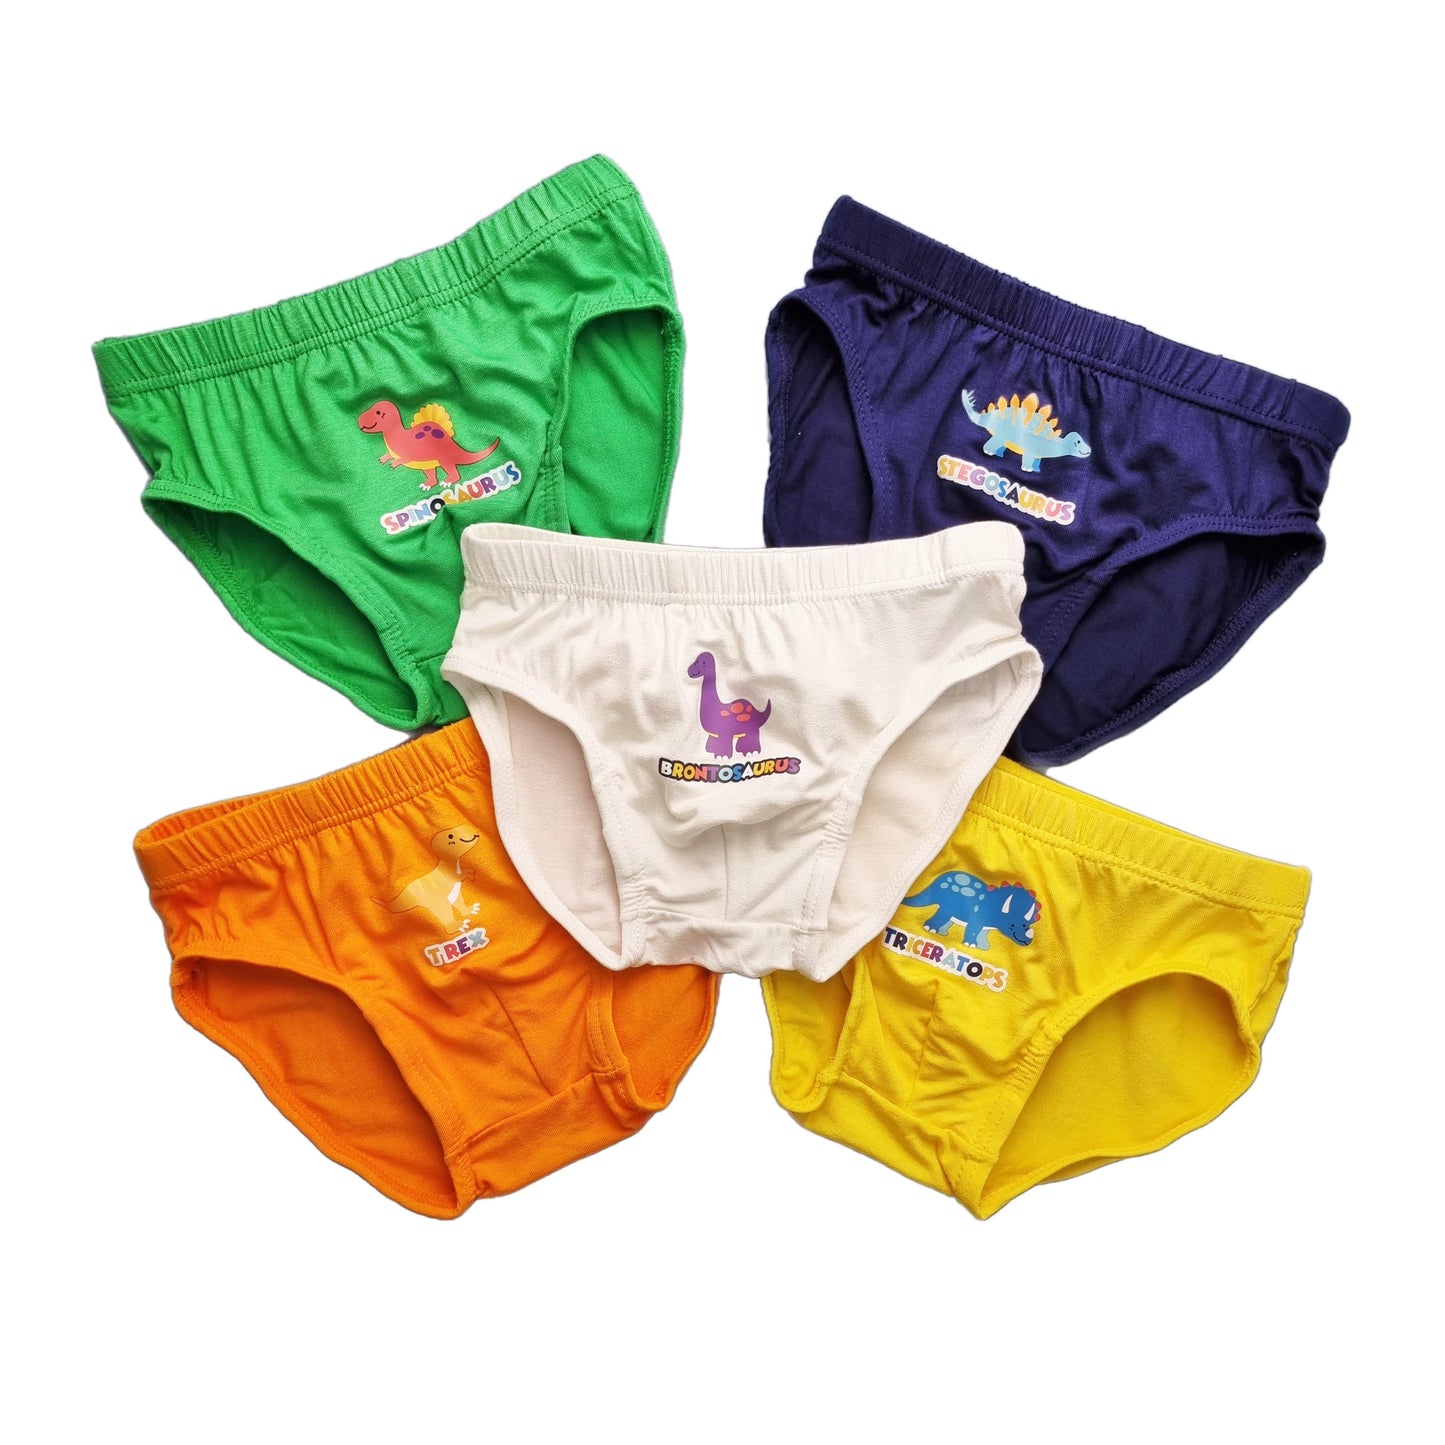 Boys Printed Briefs - Dinosaurs (Pack of 5)